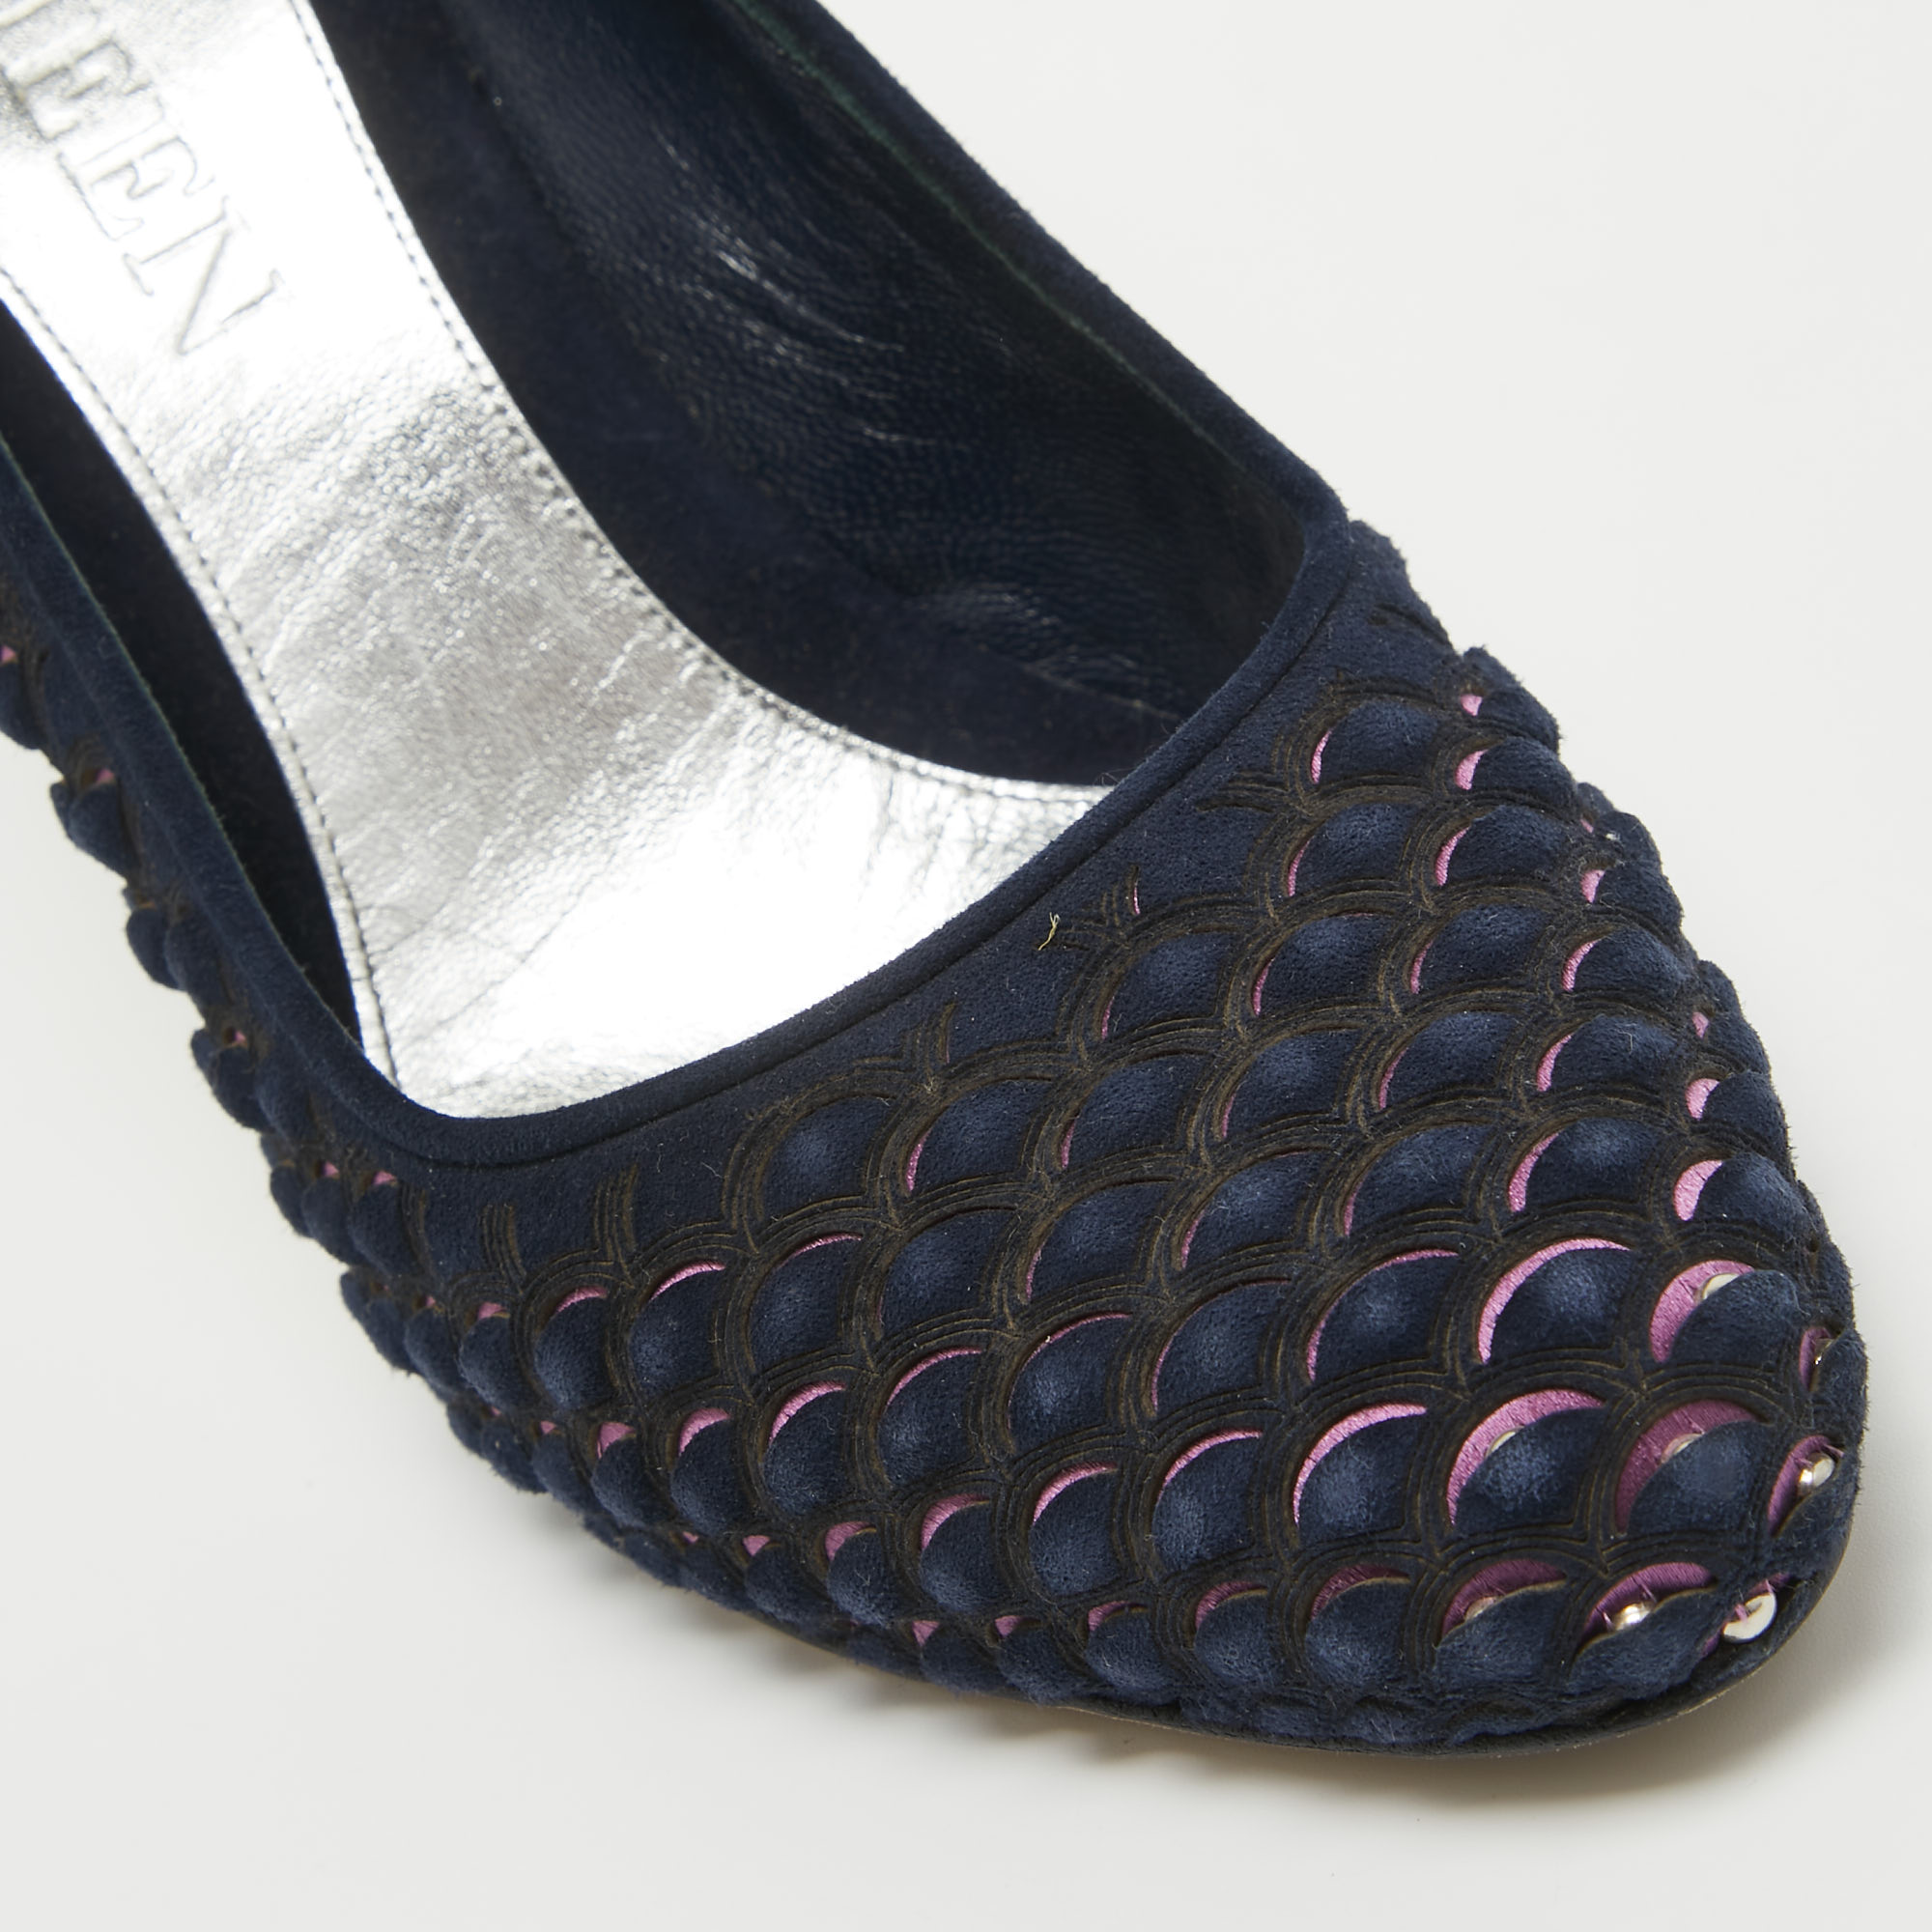 Alexander McQueen Navy Blue/Pink Laser Cut Suede And Studded Satin Round Toe Pumps Size 37.5